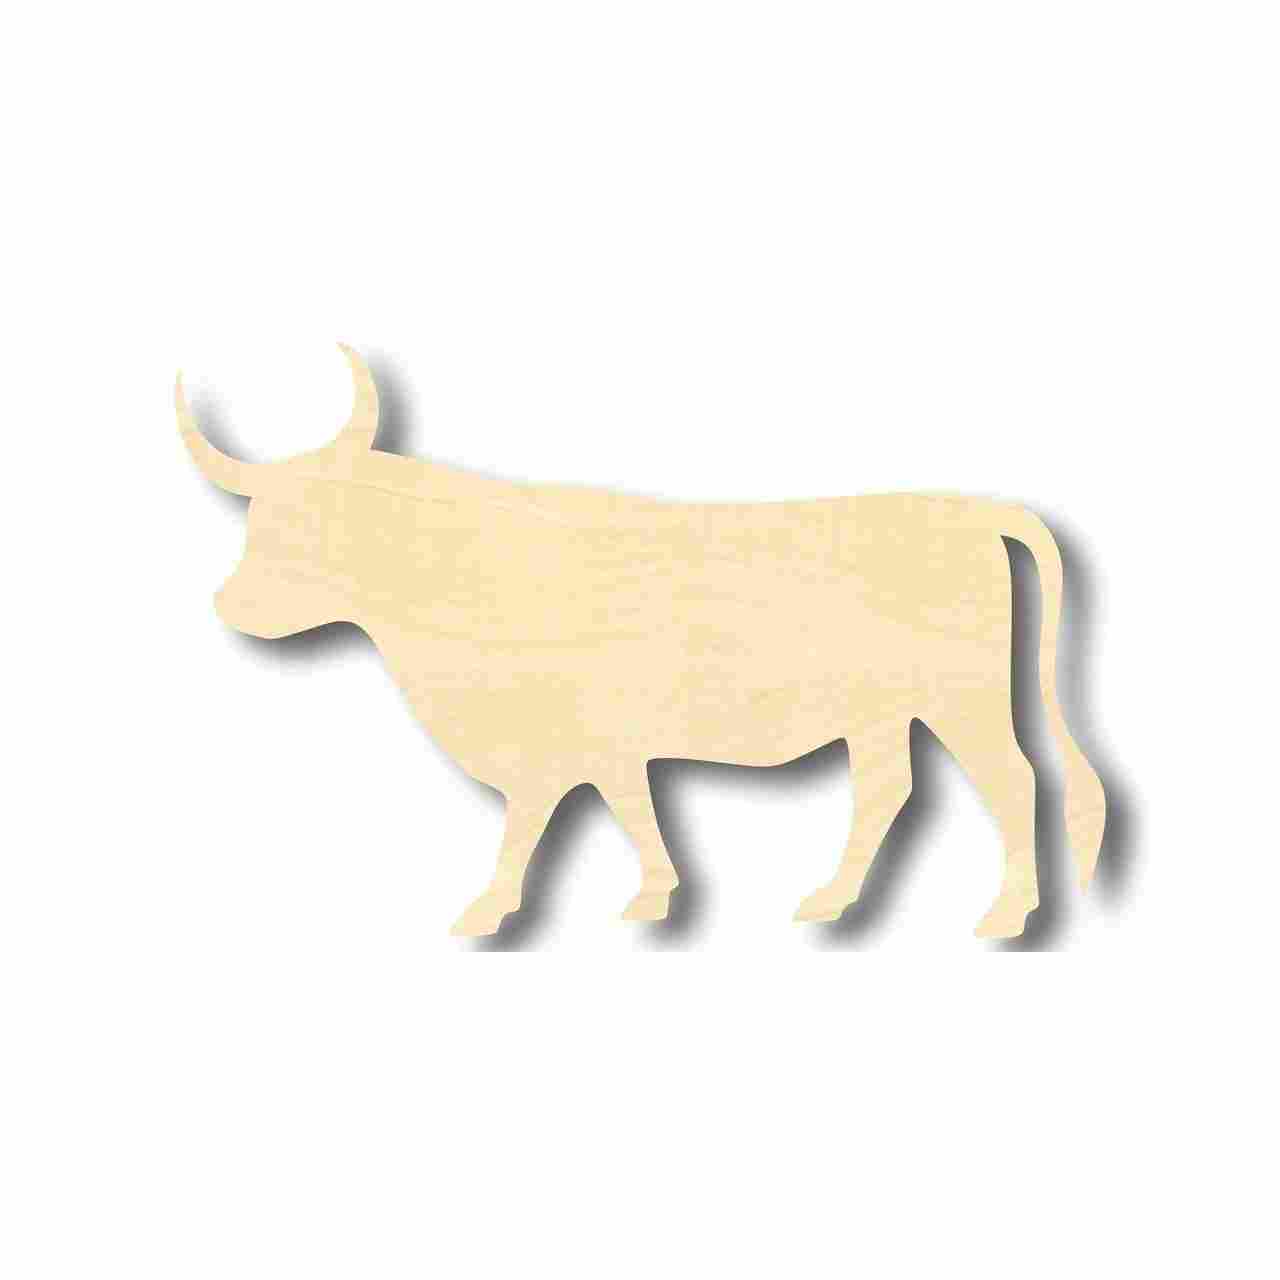 Unfinished Wooden Bull Shape - Animal - Craft - up to 24